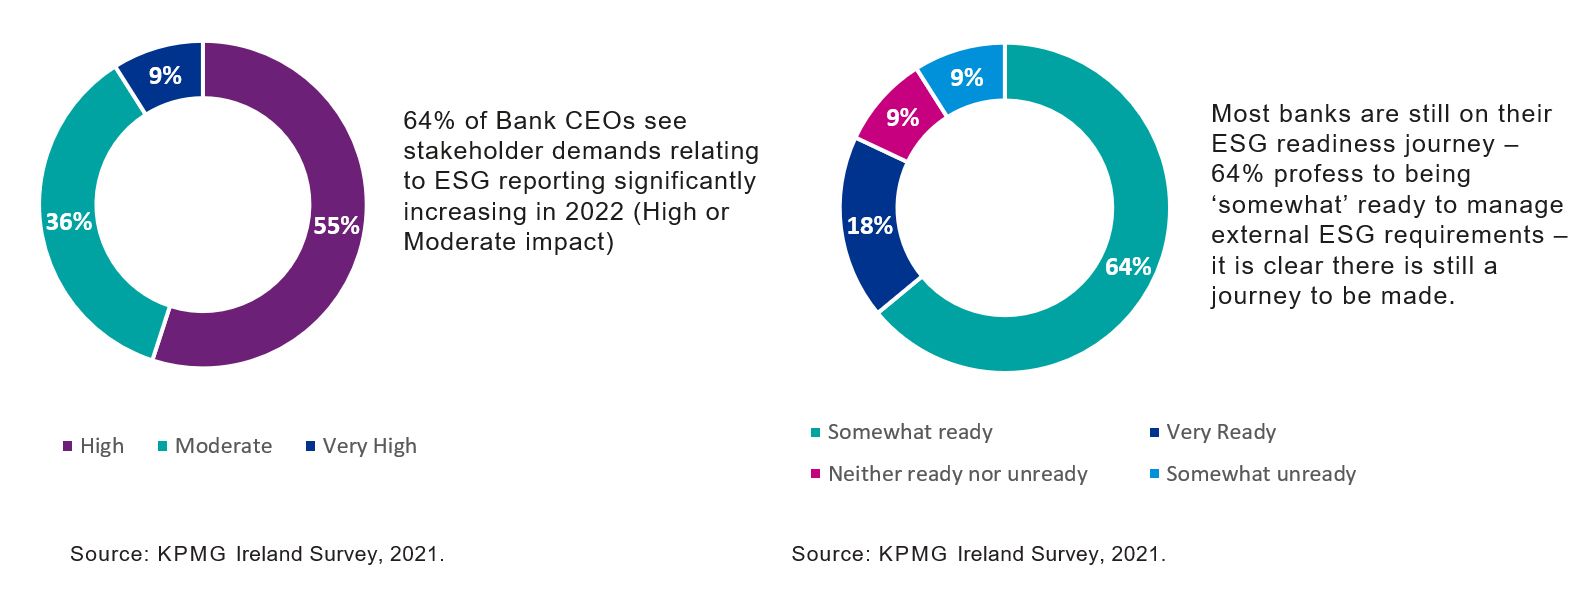 Two graphs: 64% of Bank CEOs see stakeholder demands relating to ESG reporting significantly increasing in 2022 (High or Moderate impact), and Most banks are still on their ESG readiness journey – 64% profess to being ‘somewhat’ ready to manage external ESG requirements – it is clear there is still a journey to be made.